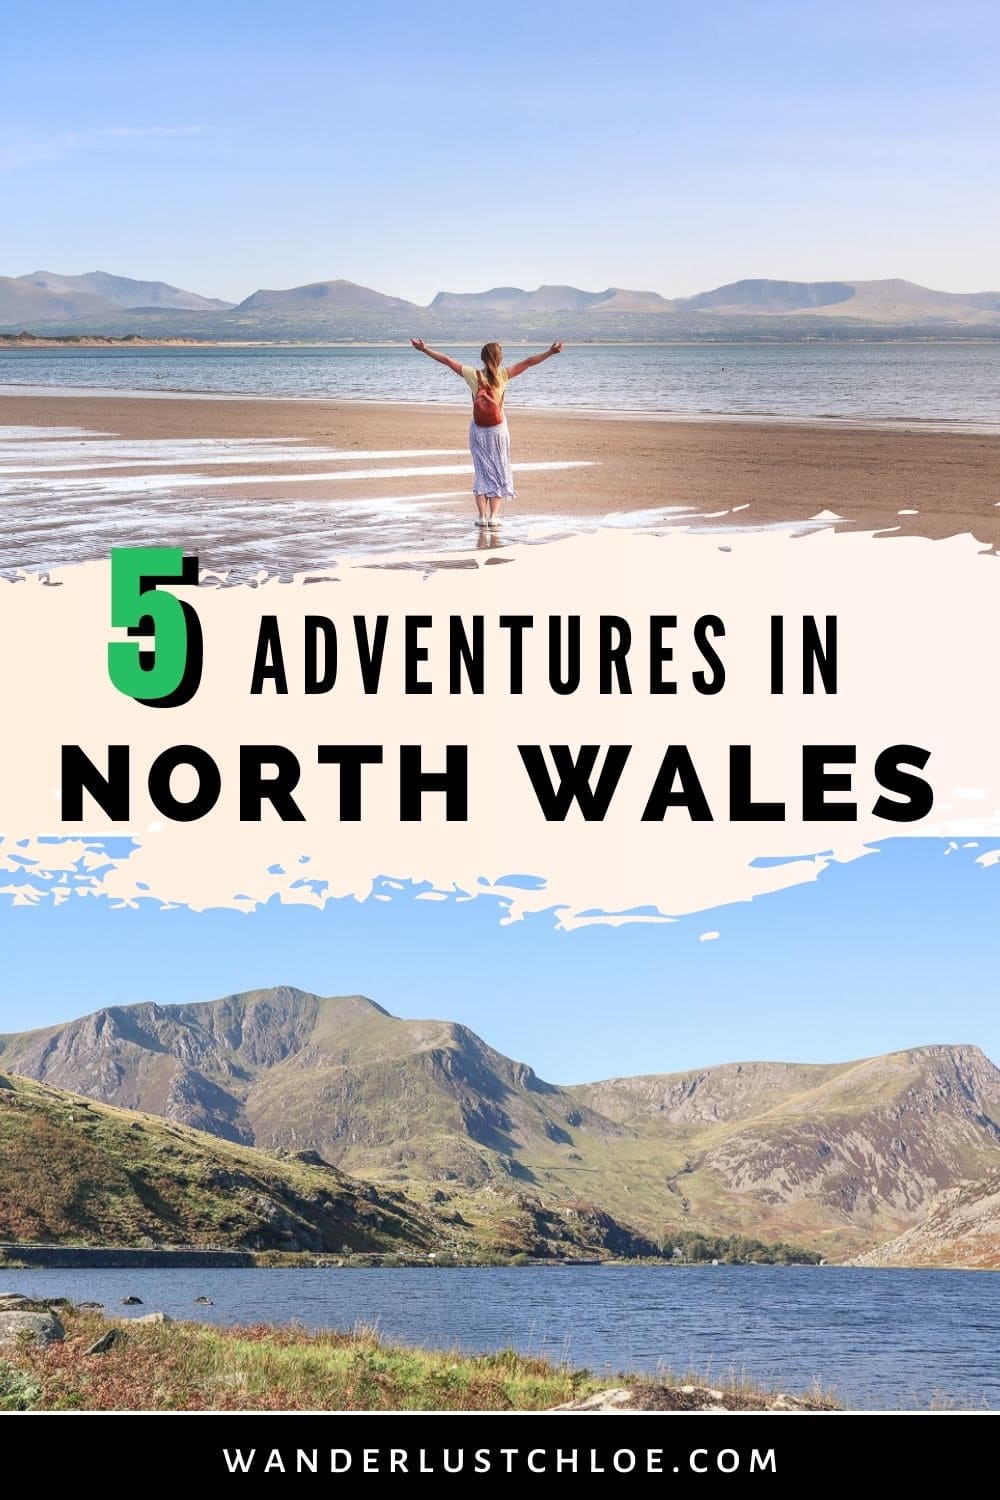 Adventures in North Wales